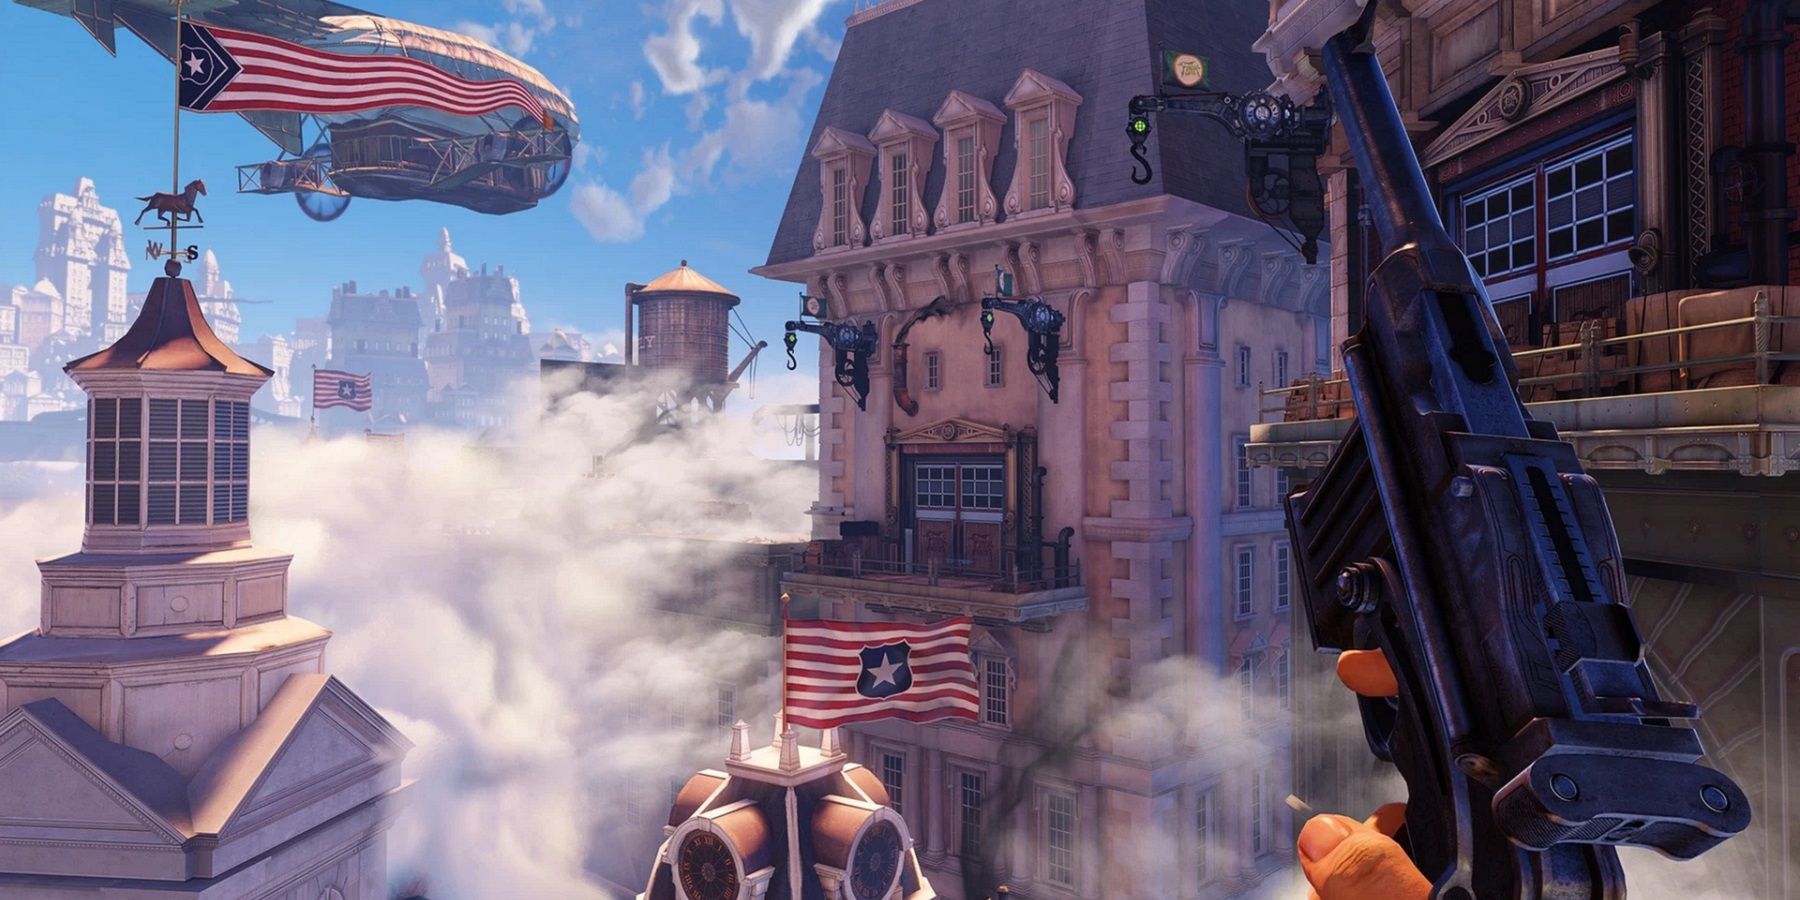 Screenshot from Bioshock: Infinite showing the city of Columbus above the clouds.